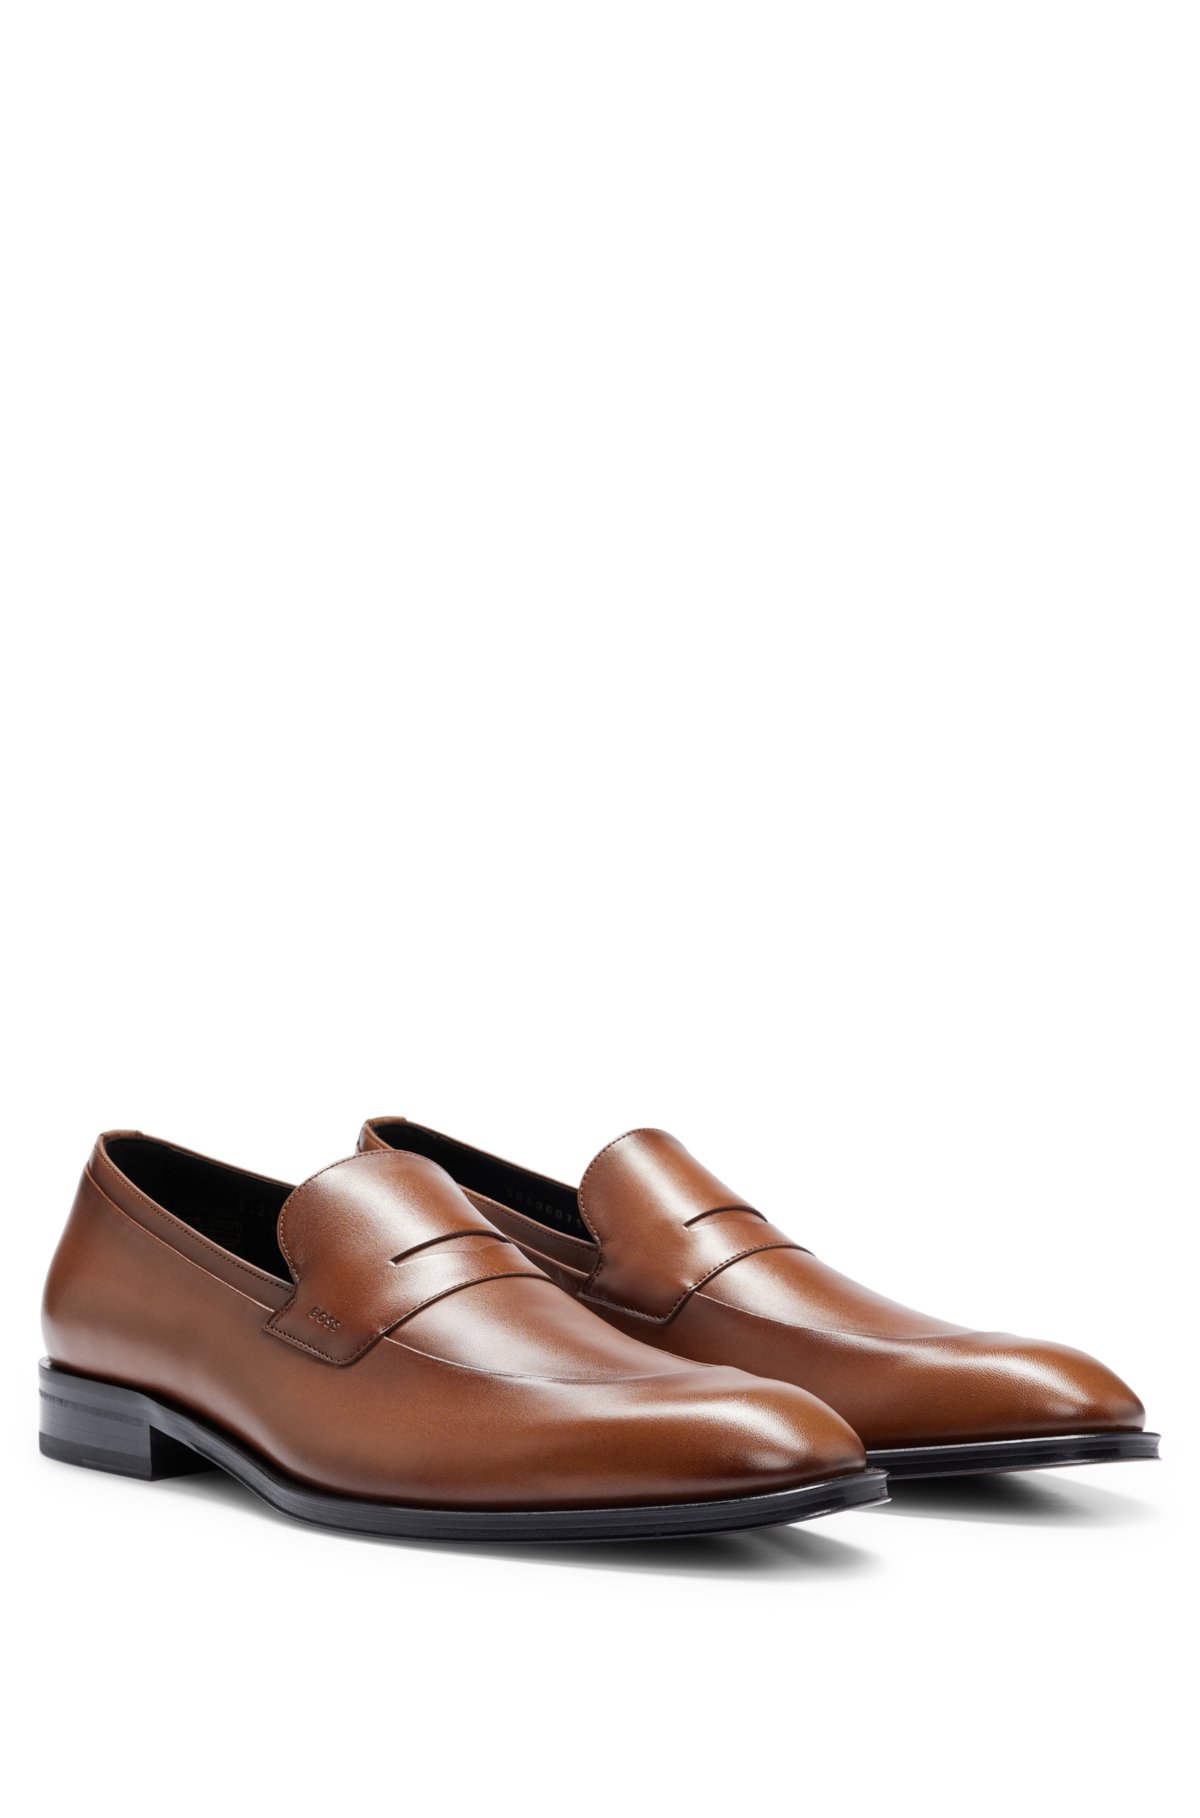 Kritisere rolige granske BOSS - Italian leather loafers with apron toe and branded trim